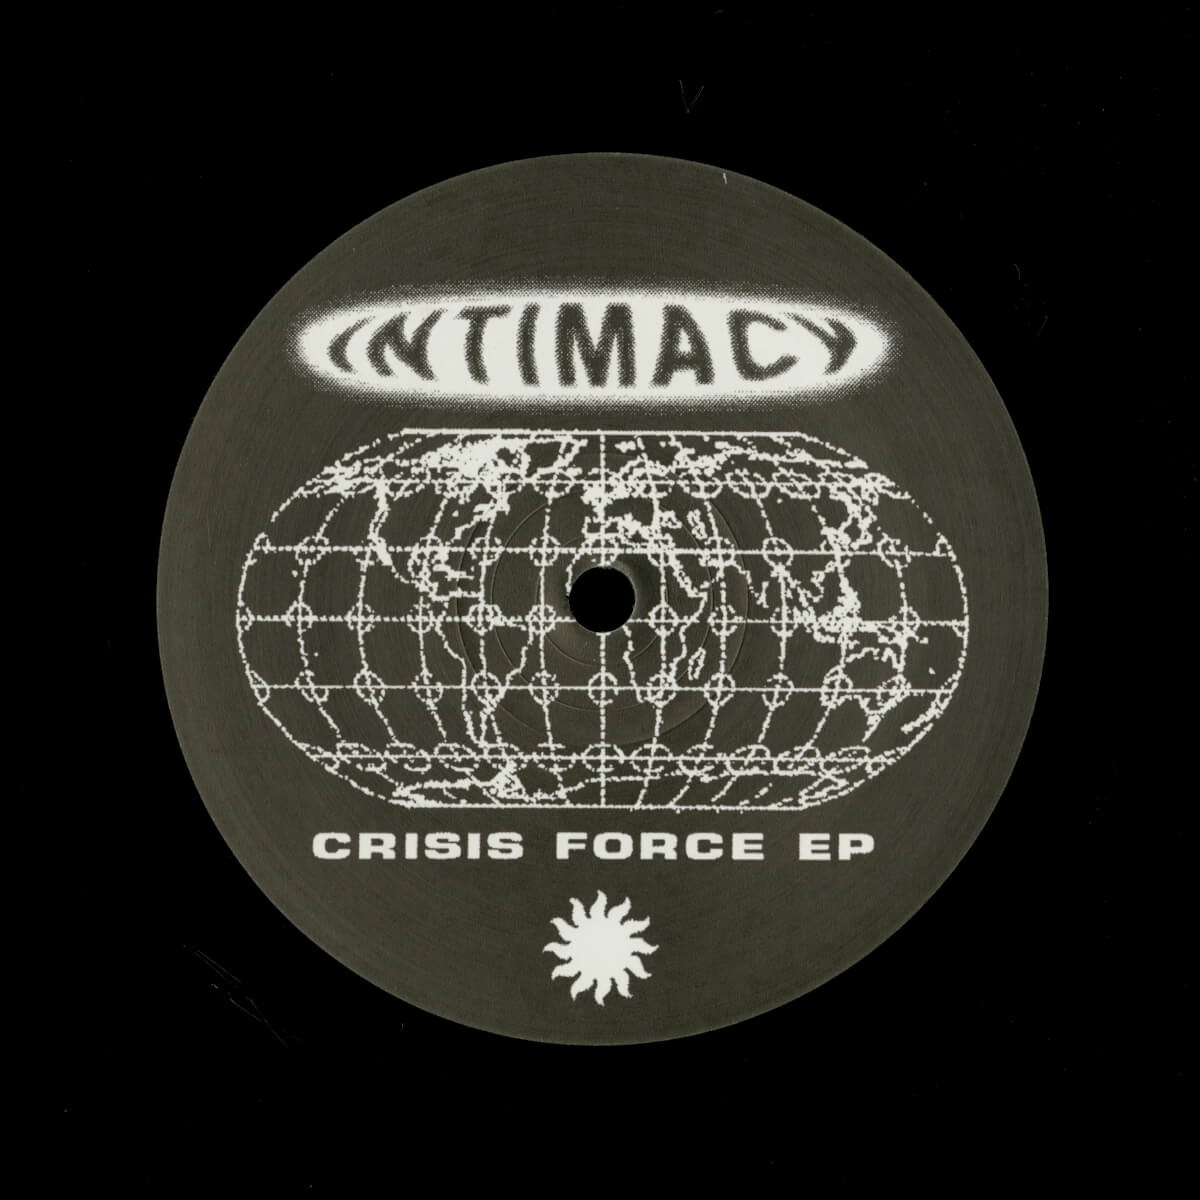 Intimacy – Crisis Force EP